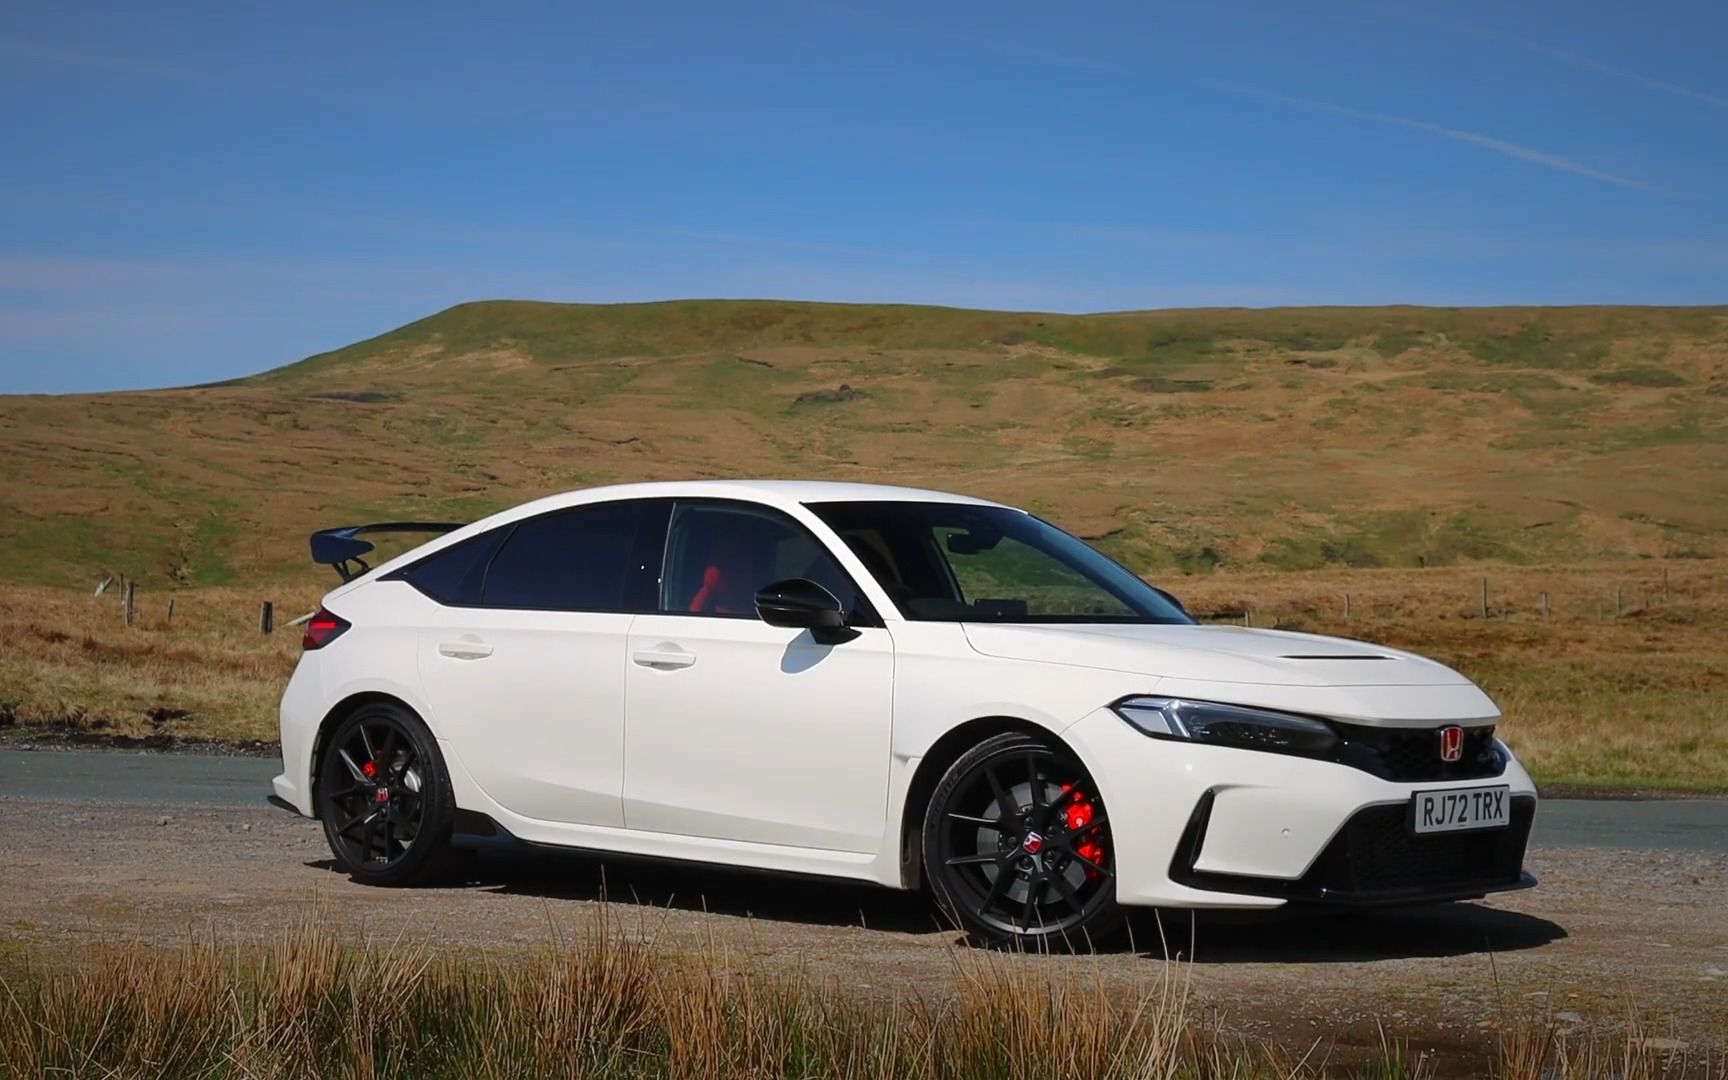 fl5 honda civic type r review: the ultimate swansong?